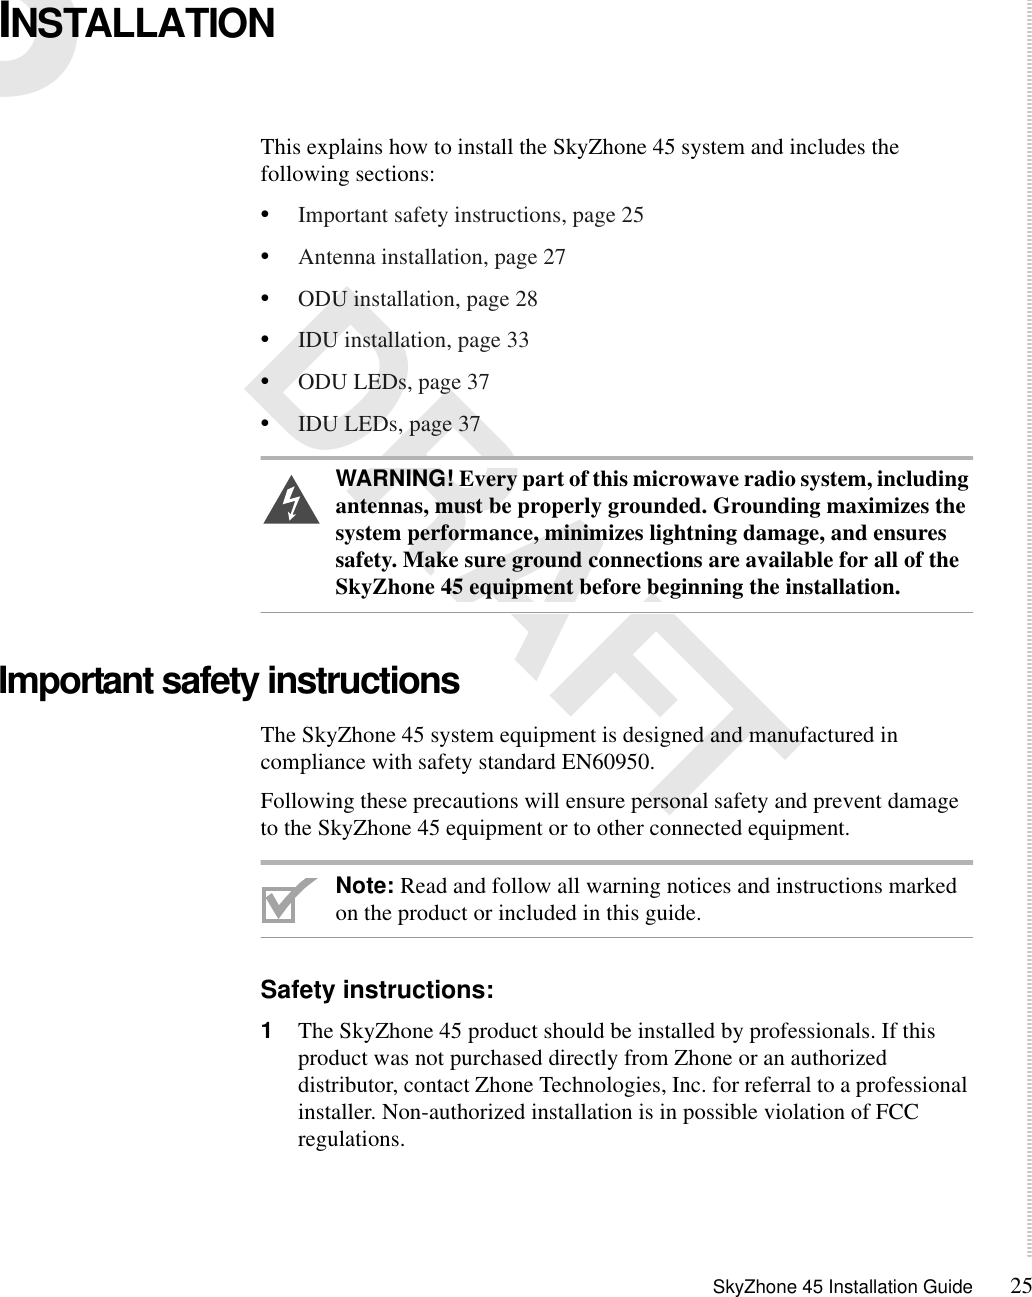 SkyZhone 45 Installation Guide 253 DRAFTINSTALLATIONThis explains how to install the SkyZhone 45 system and includes the following sections:•Important safety instructions, page 25•Antenna installation, page 27•ODU installation, page 28•IDU installation, page 33•ODU LEDs, page 37•IDU LEDs, page 37WARNING! Every part of this microwave radio system, including antennas, must be properly grounded. Grounding maximizes the system performance, minimizes lightning damage, and ensures safety. Make sure ground connections are available for all of the SkyZhone 45 equipment before beginning the installation. Important safety instructions The SkyZhone 45 system equipment is designed and manufactured in compliance with safety standard EN60950.Following these precautions will ensure personal safety and prevent damage to the SkyZhone 45 equipment or to other connected equipment. Note: Read and follow all warning notices and instructions marked on the product or included in this guide.Safety instructions:1The SkyZhone 45 product should be installed by professionals. If this product was not purchased directly from Zhone or an authorized distributor, contact Zhone Technologies, Inc. for referral to a professional installer. Non-authorized installation is in possible violation of FCC regulations.